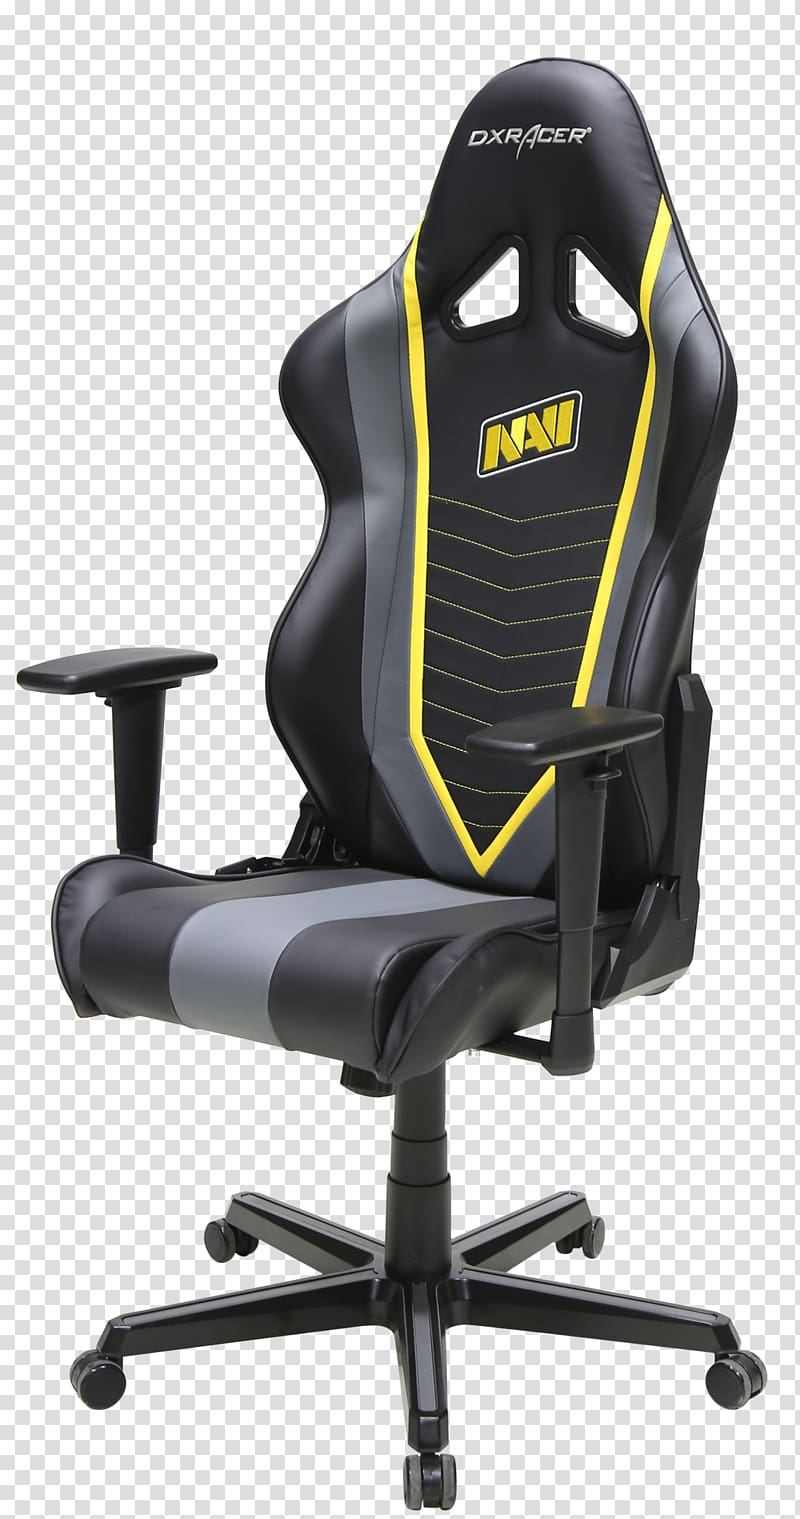 DXRacer Gaming chair Office & Desk Chairs Video game, chair transparent background PNG clipart